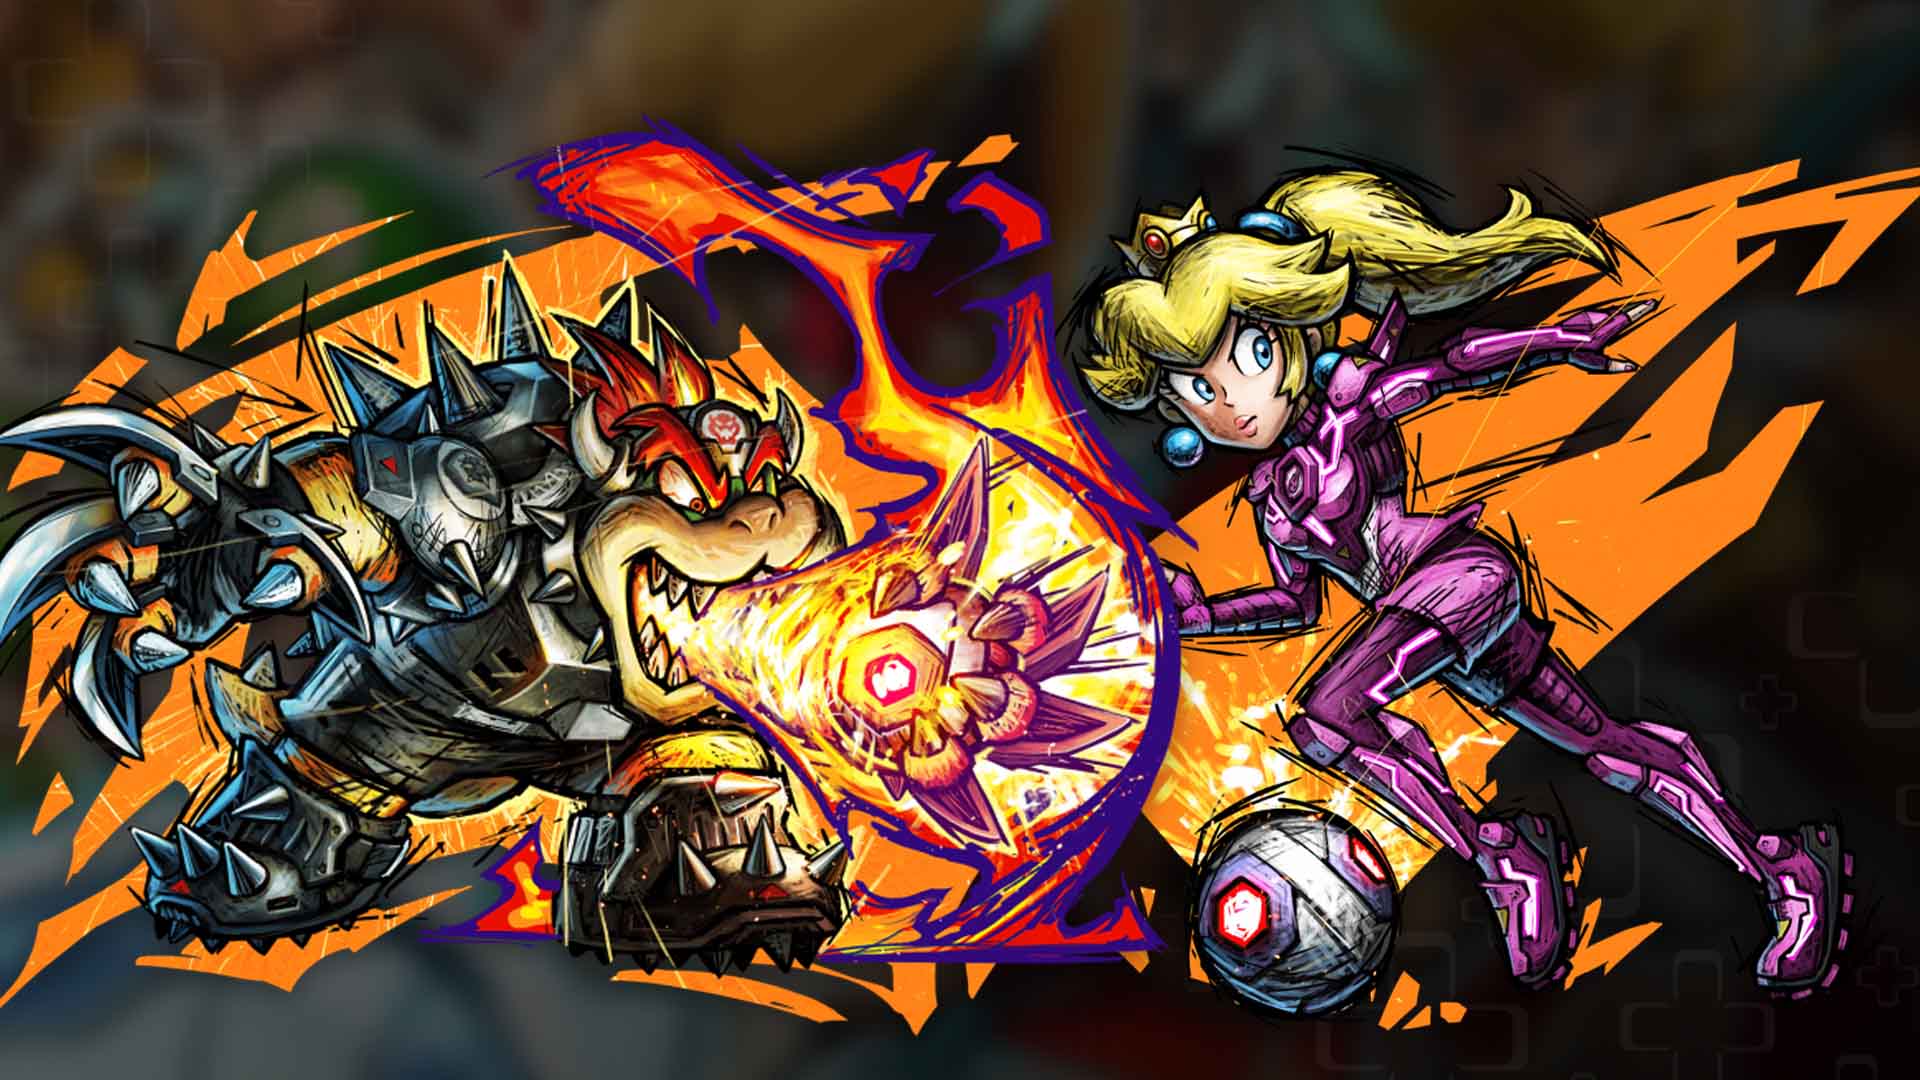 Mario Strikers: Battle League intro shows off powerful characters and their moves